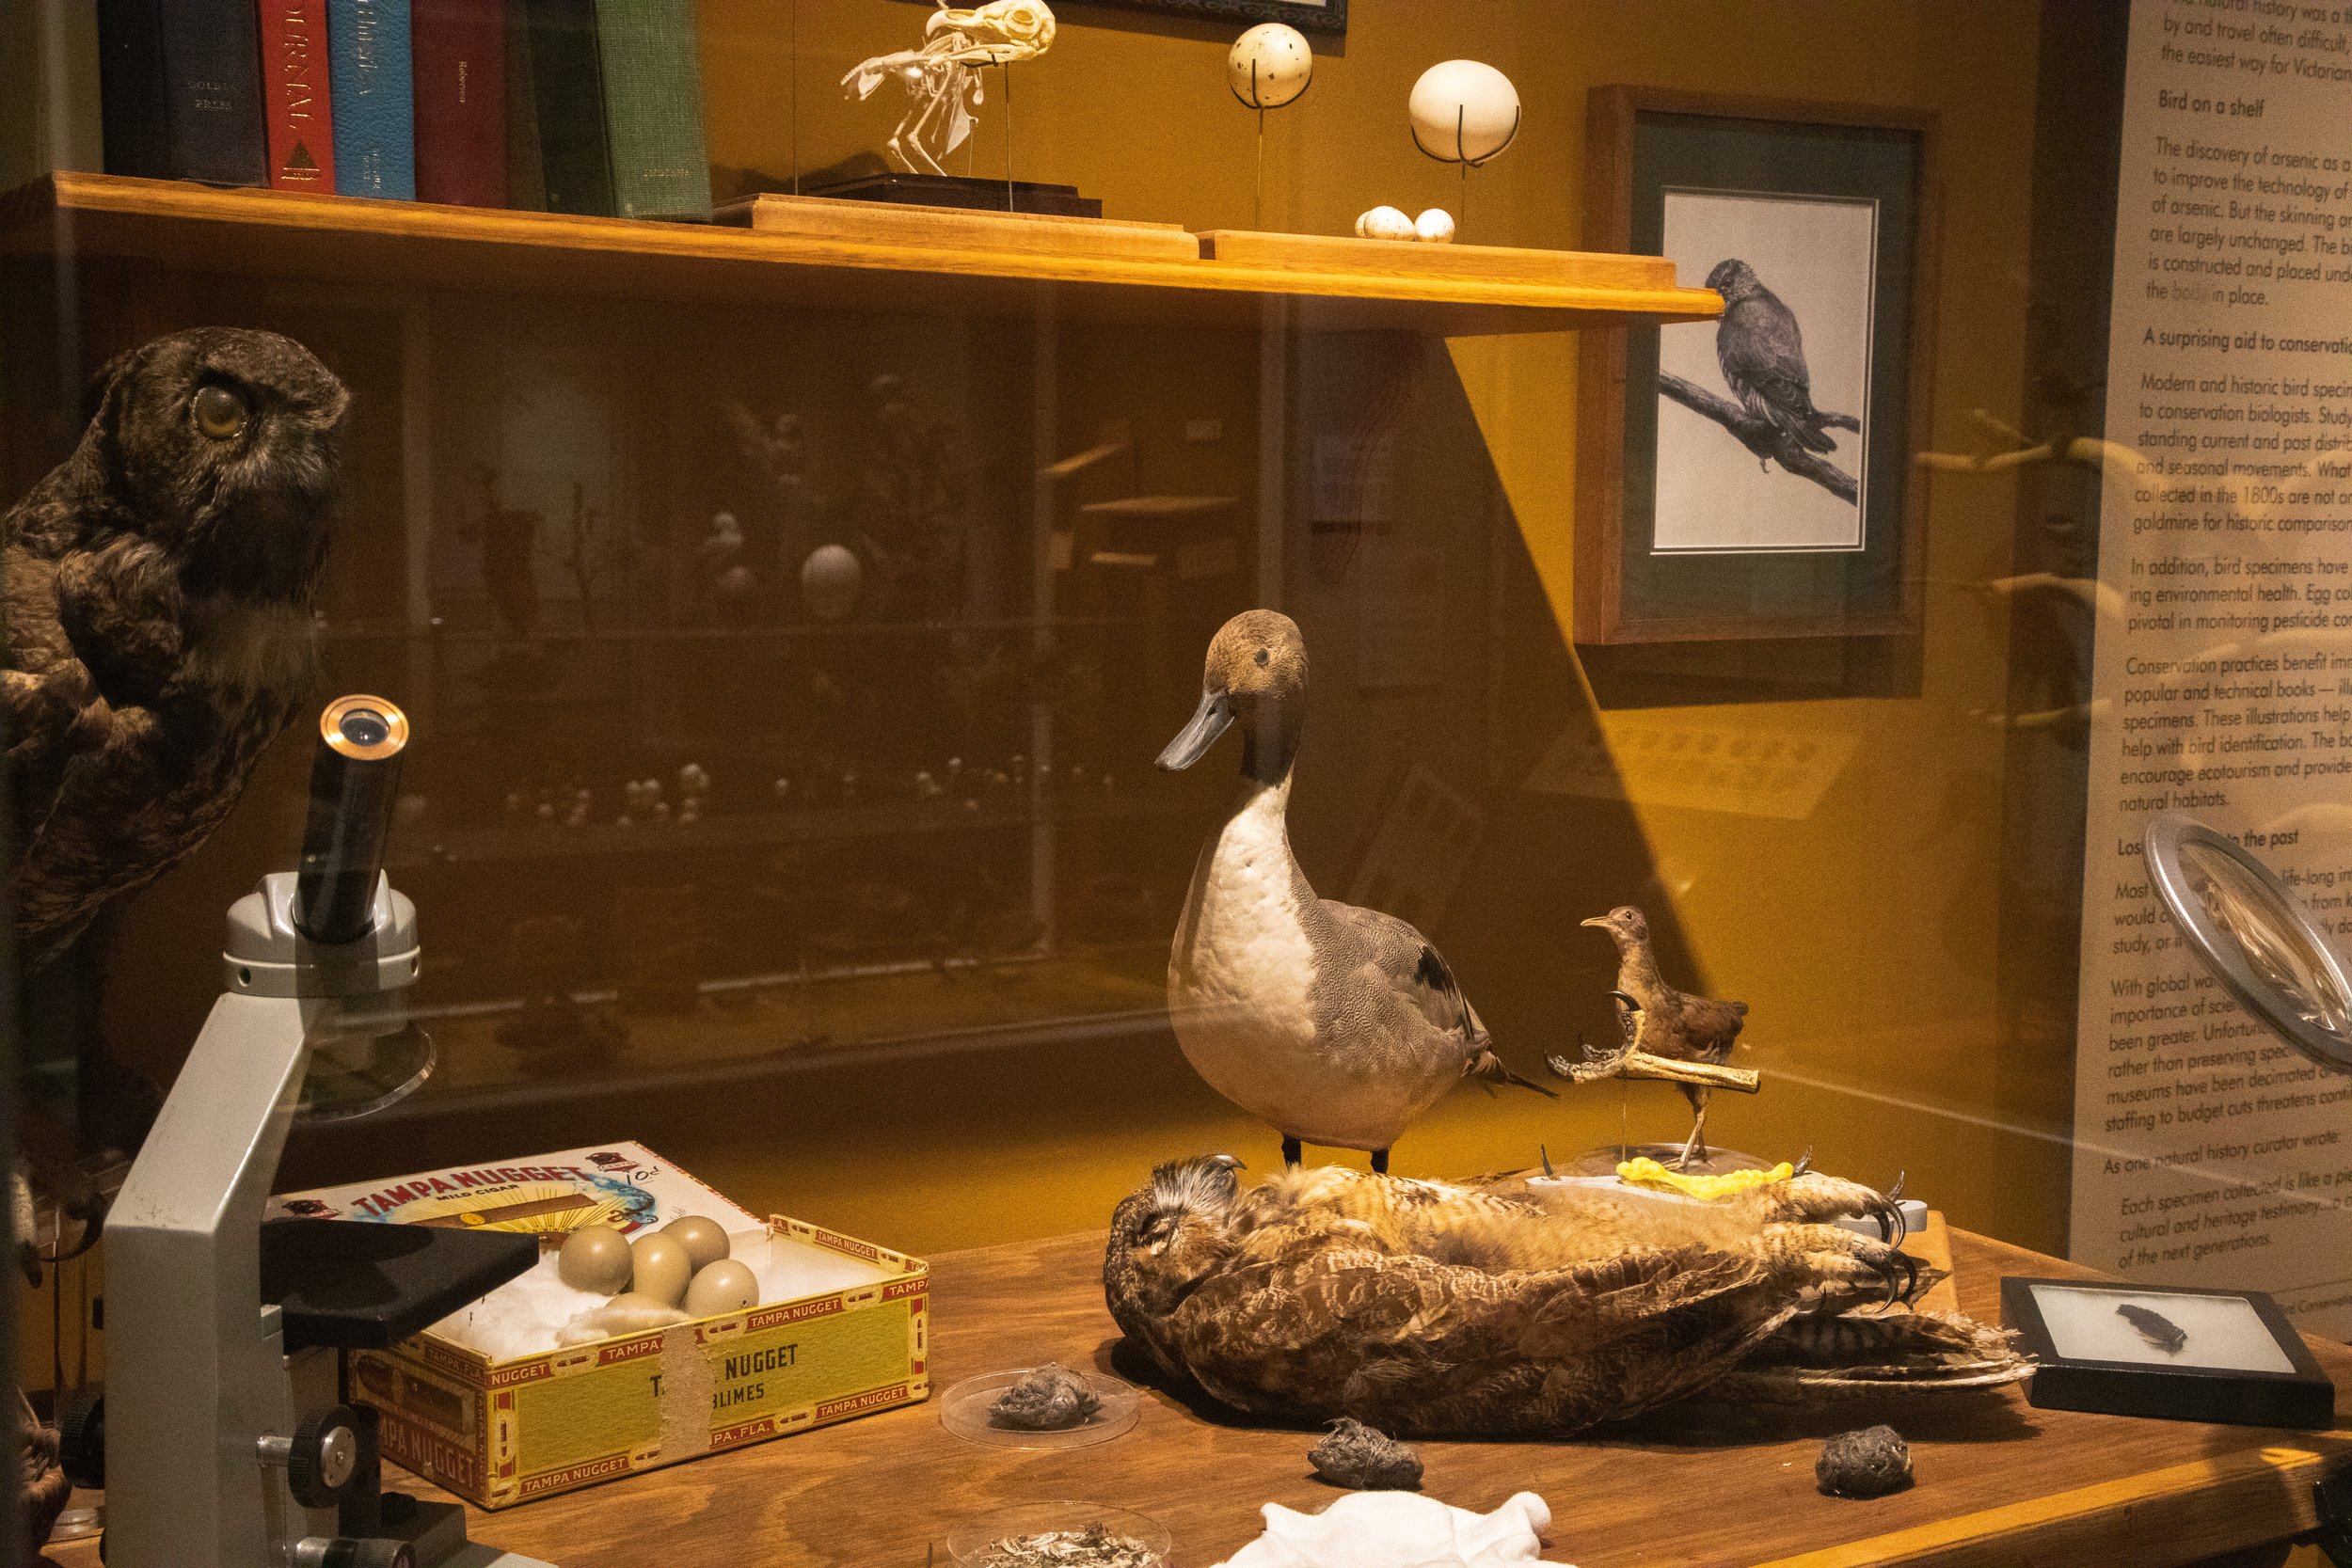  A recreation of John Edson’s workspace staged to examine owl pellets among other bird specimens at the John Edson Hall of Birds exhibit at Whatcom Museum. This display shows the scientific use of taxidermied specimens. // Photo by Emily Davis 